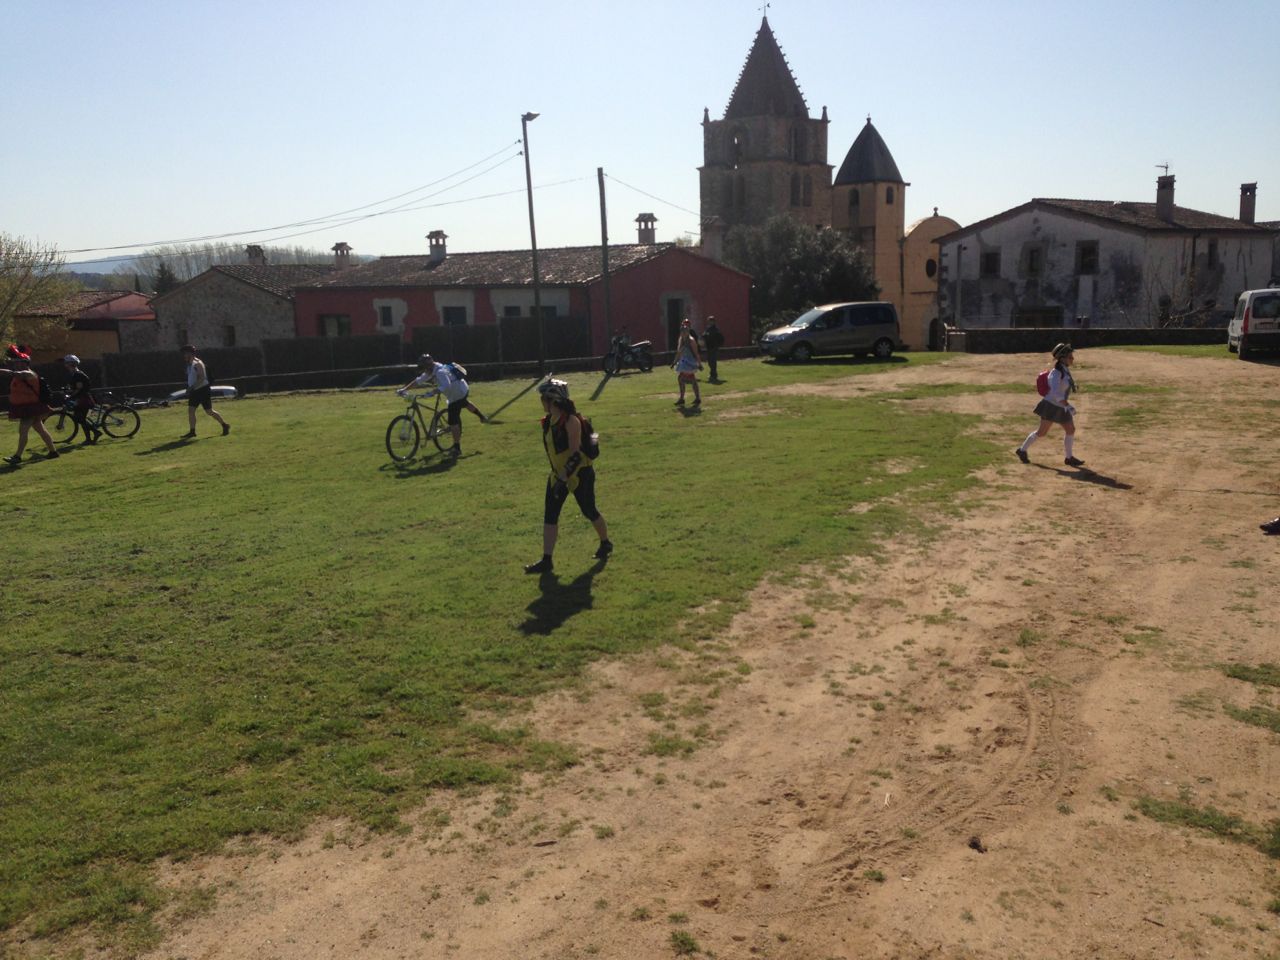 A few people walking and riding bikes, on a grass and dirt field, with building and a church behind